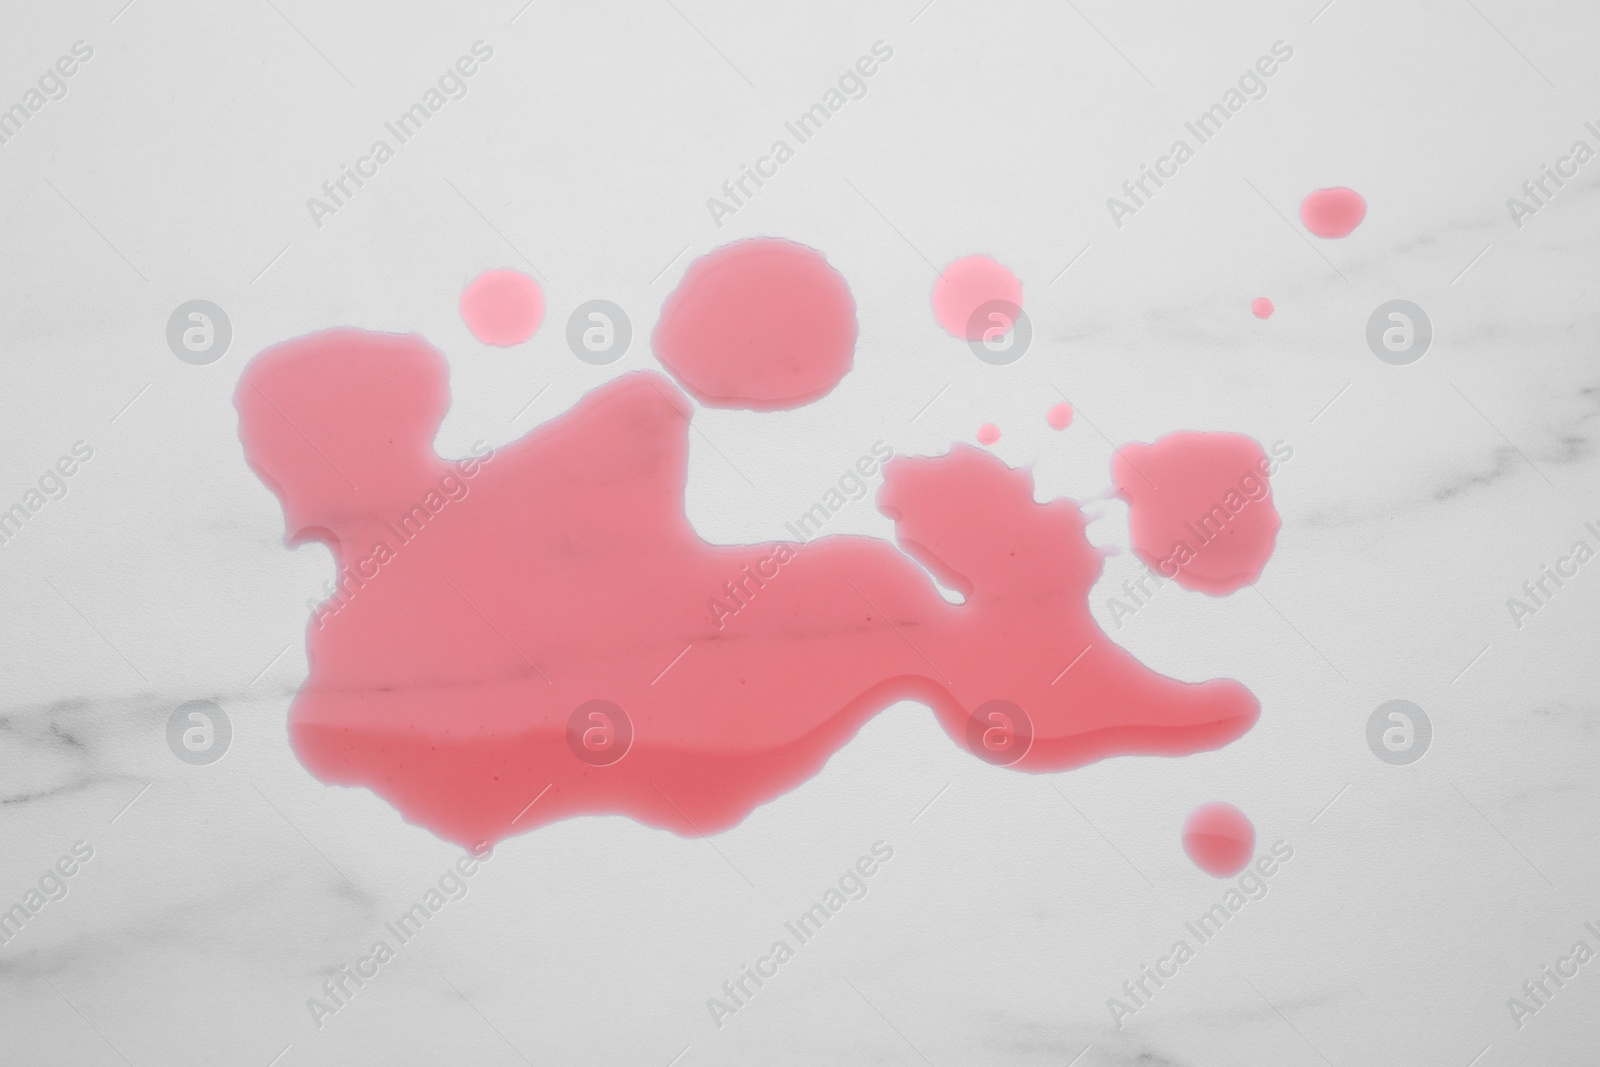 Photo of Puddle of red liquid on white marble surface, top view